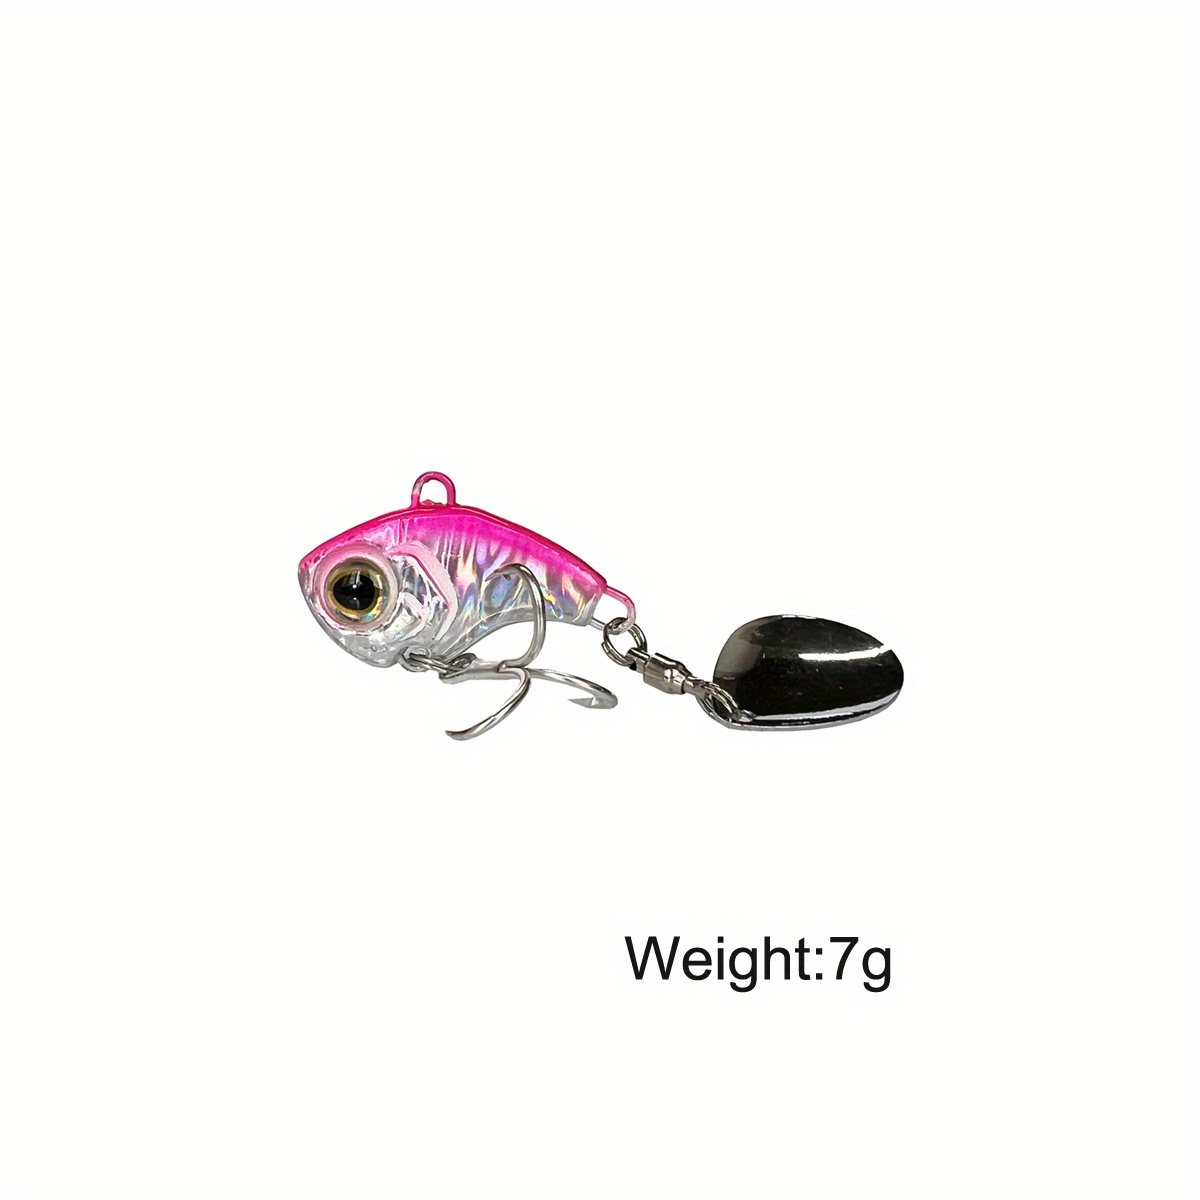  NORIES Metal Vibration TG Jaca Blade 2.2 inches (57 mm), 0.4  oz (12 g), Real Shrimp #144 : Sports & Outdoors